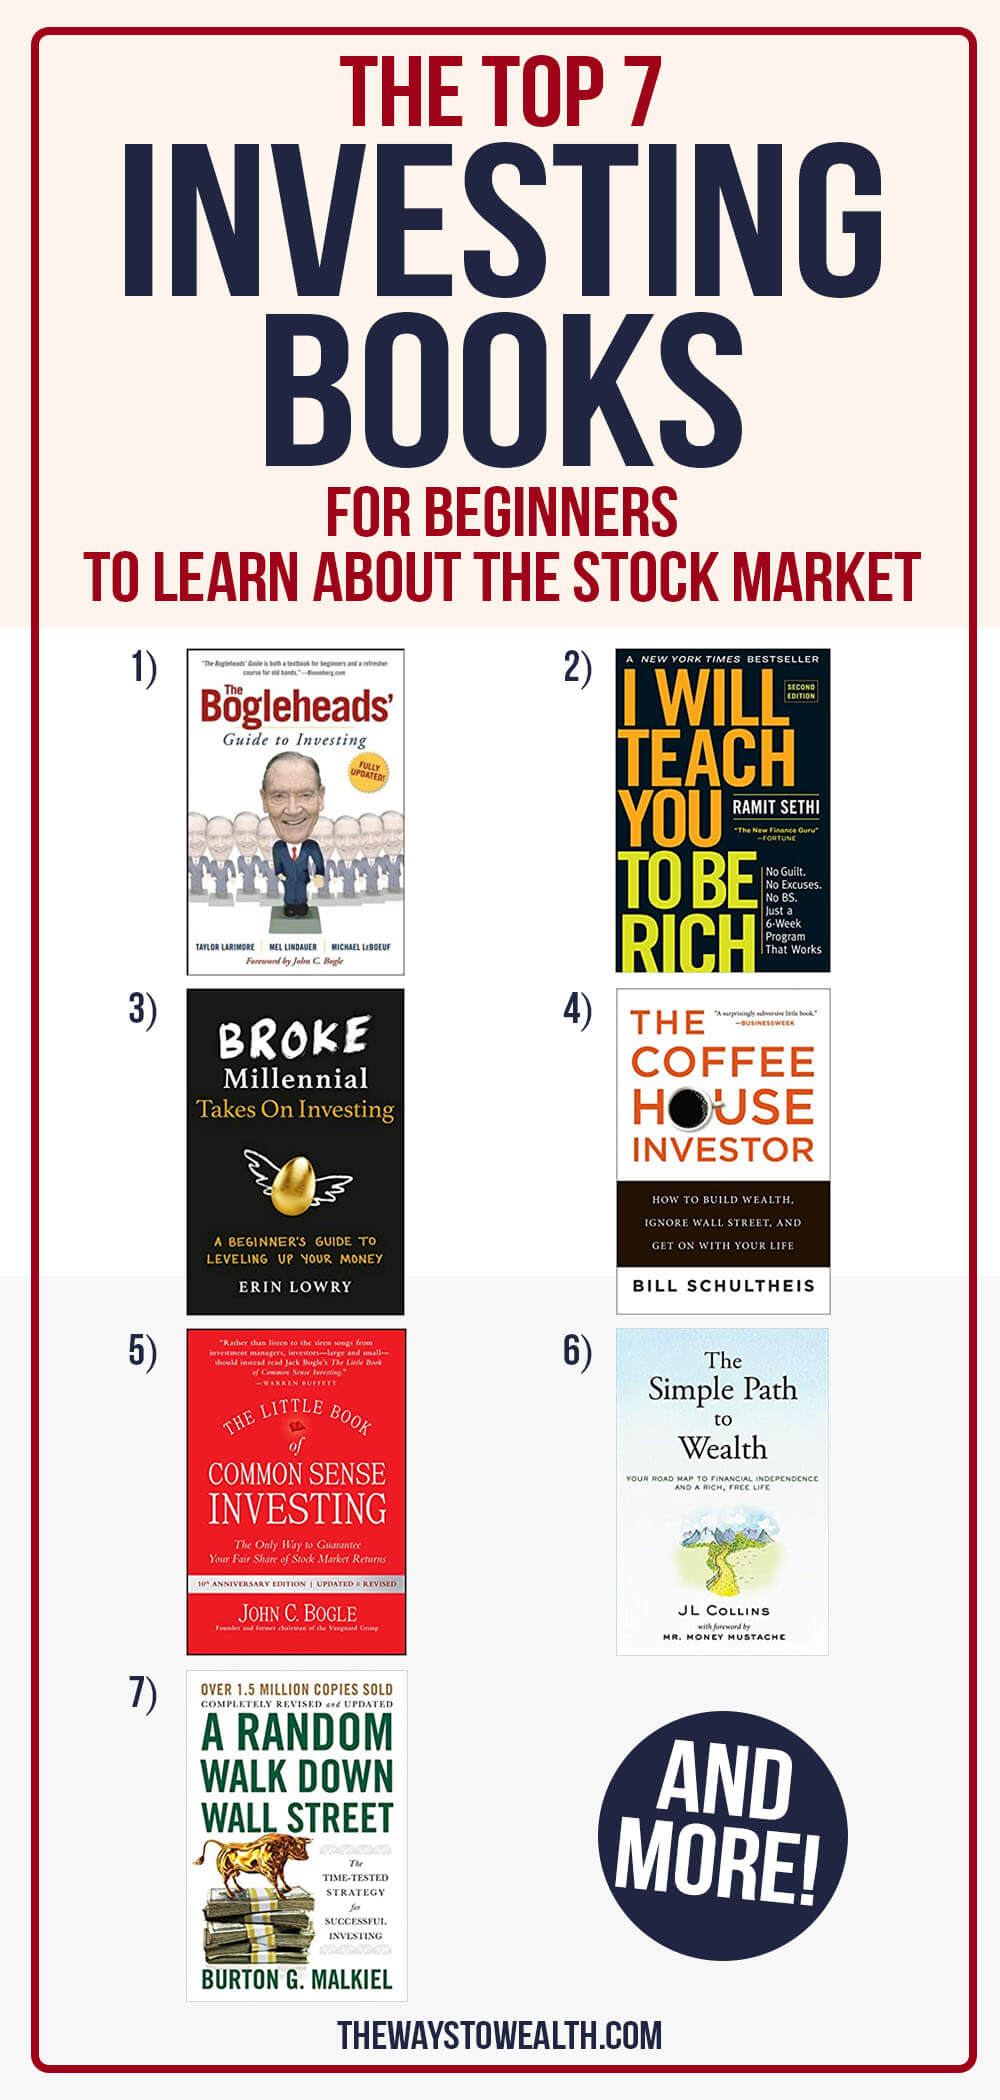 The Best Investing Books for Beginners to Learn the Stock Market (2020)